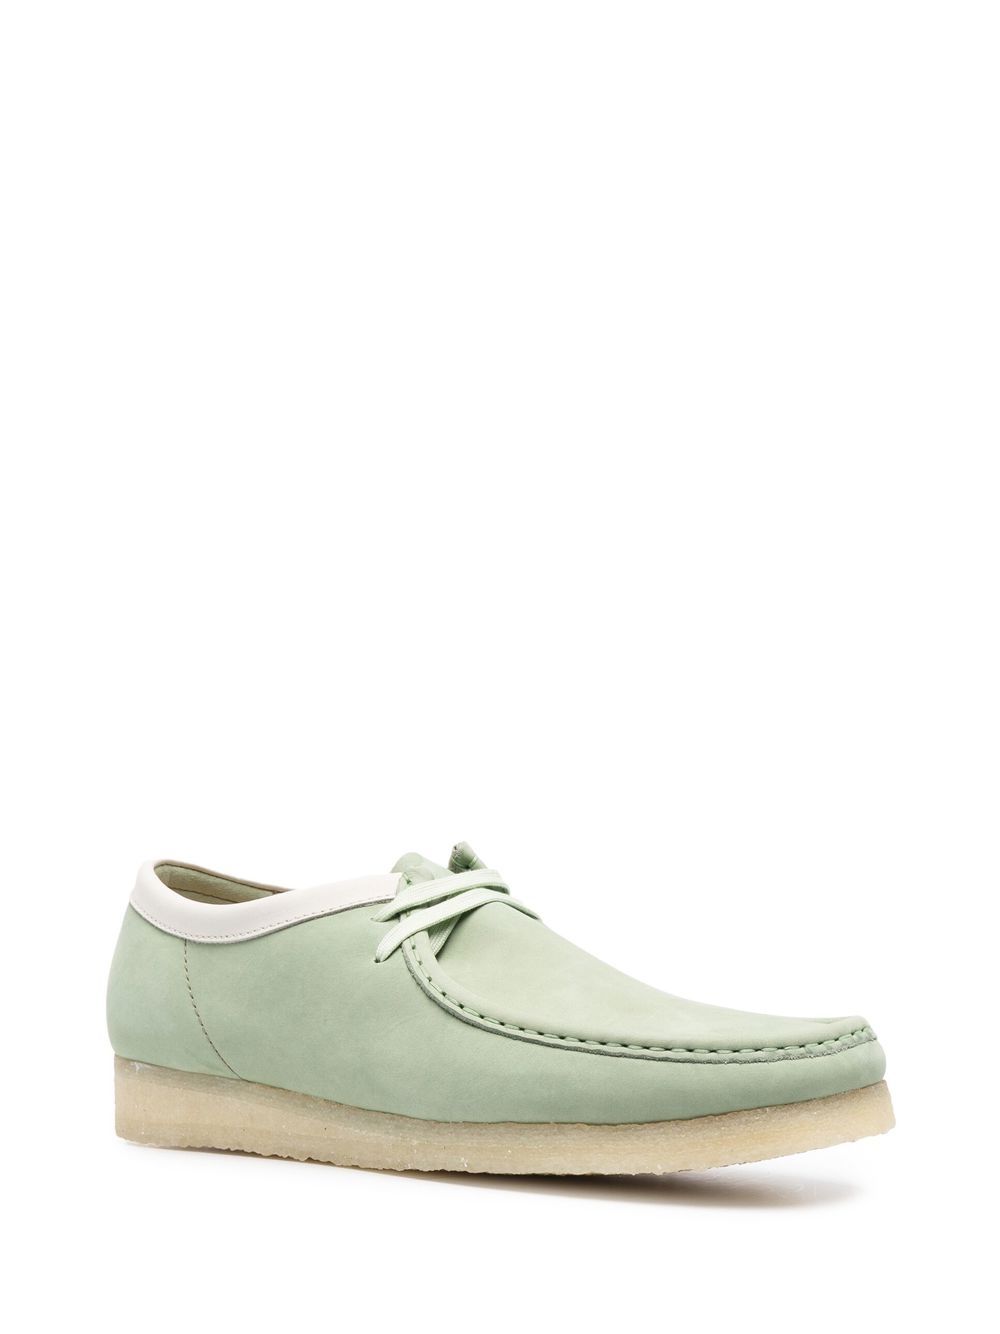 Clarks Originals suede-leather Laced Boat Shoes - Farfetch